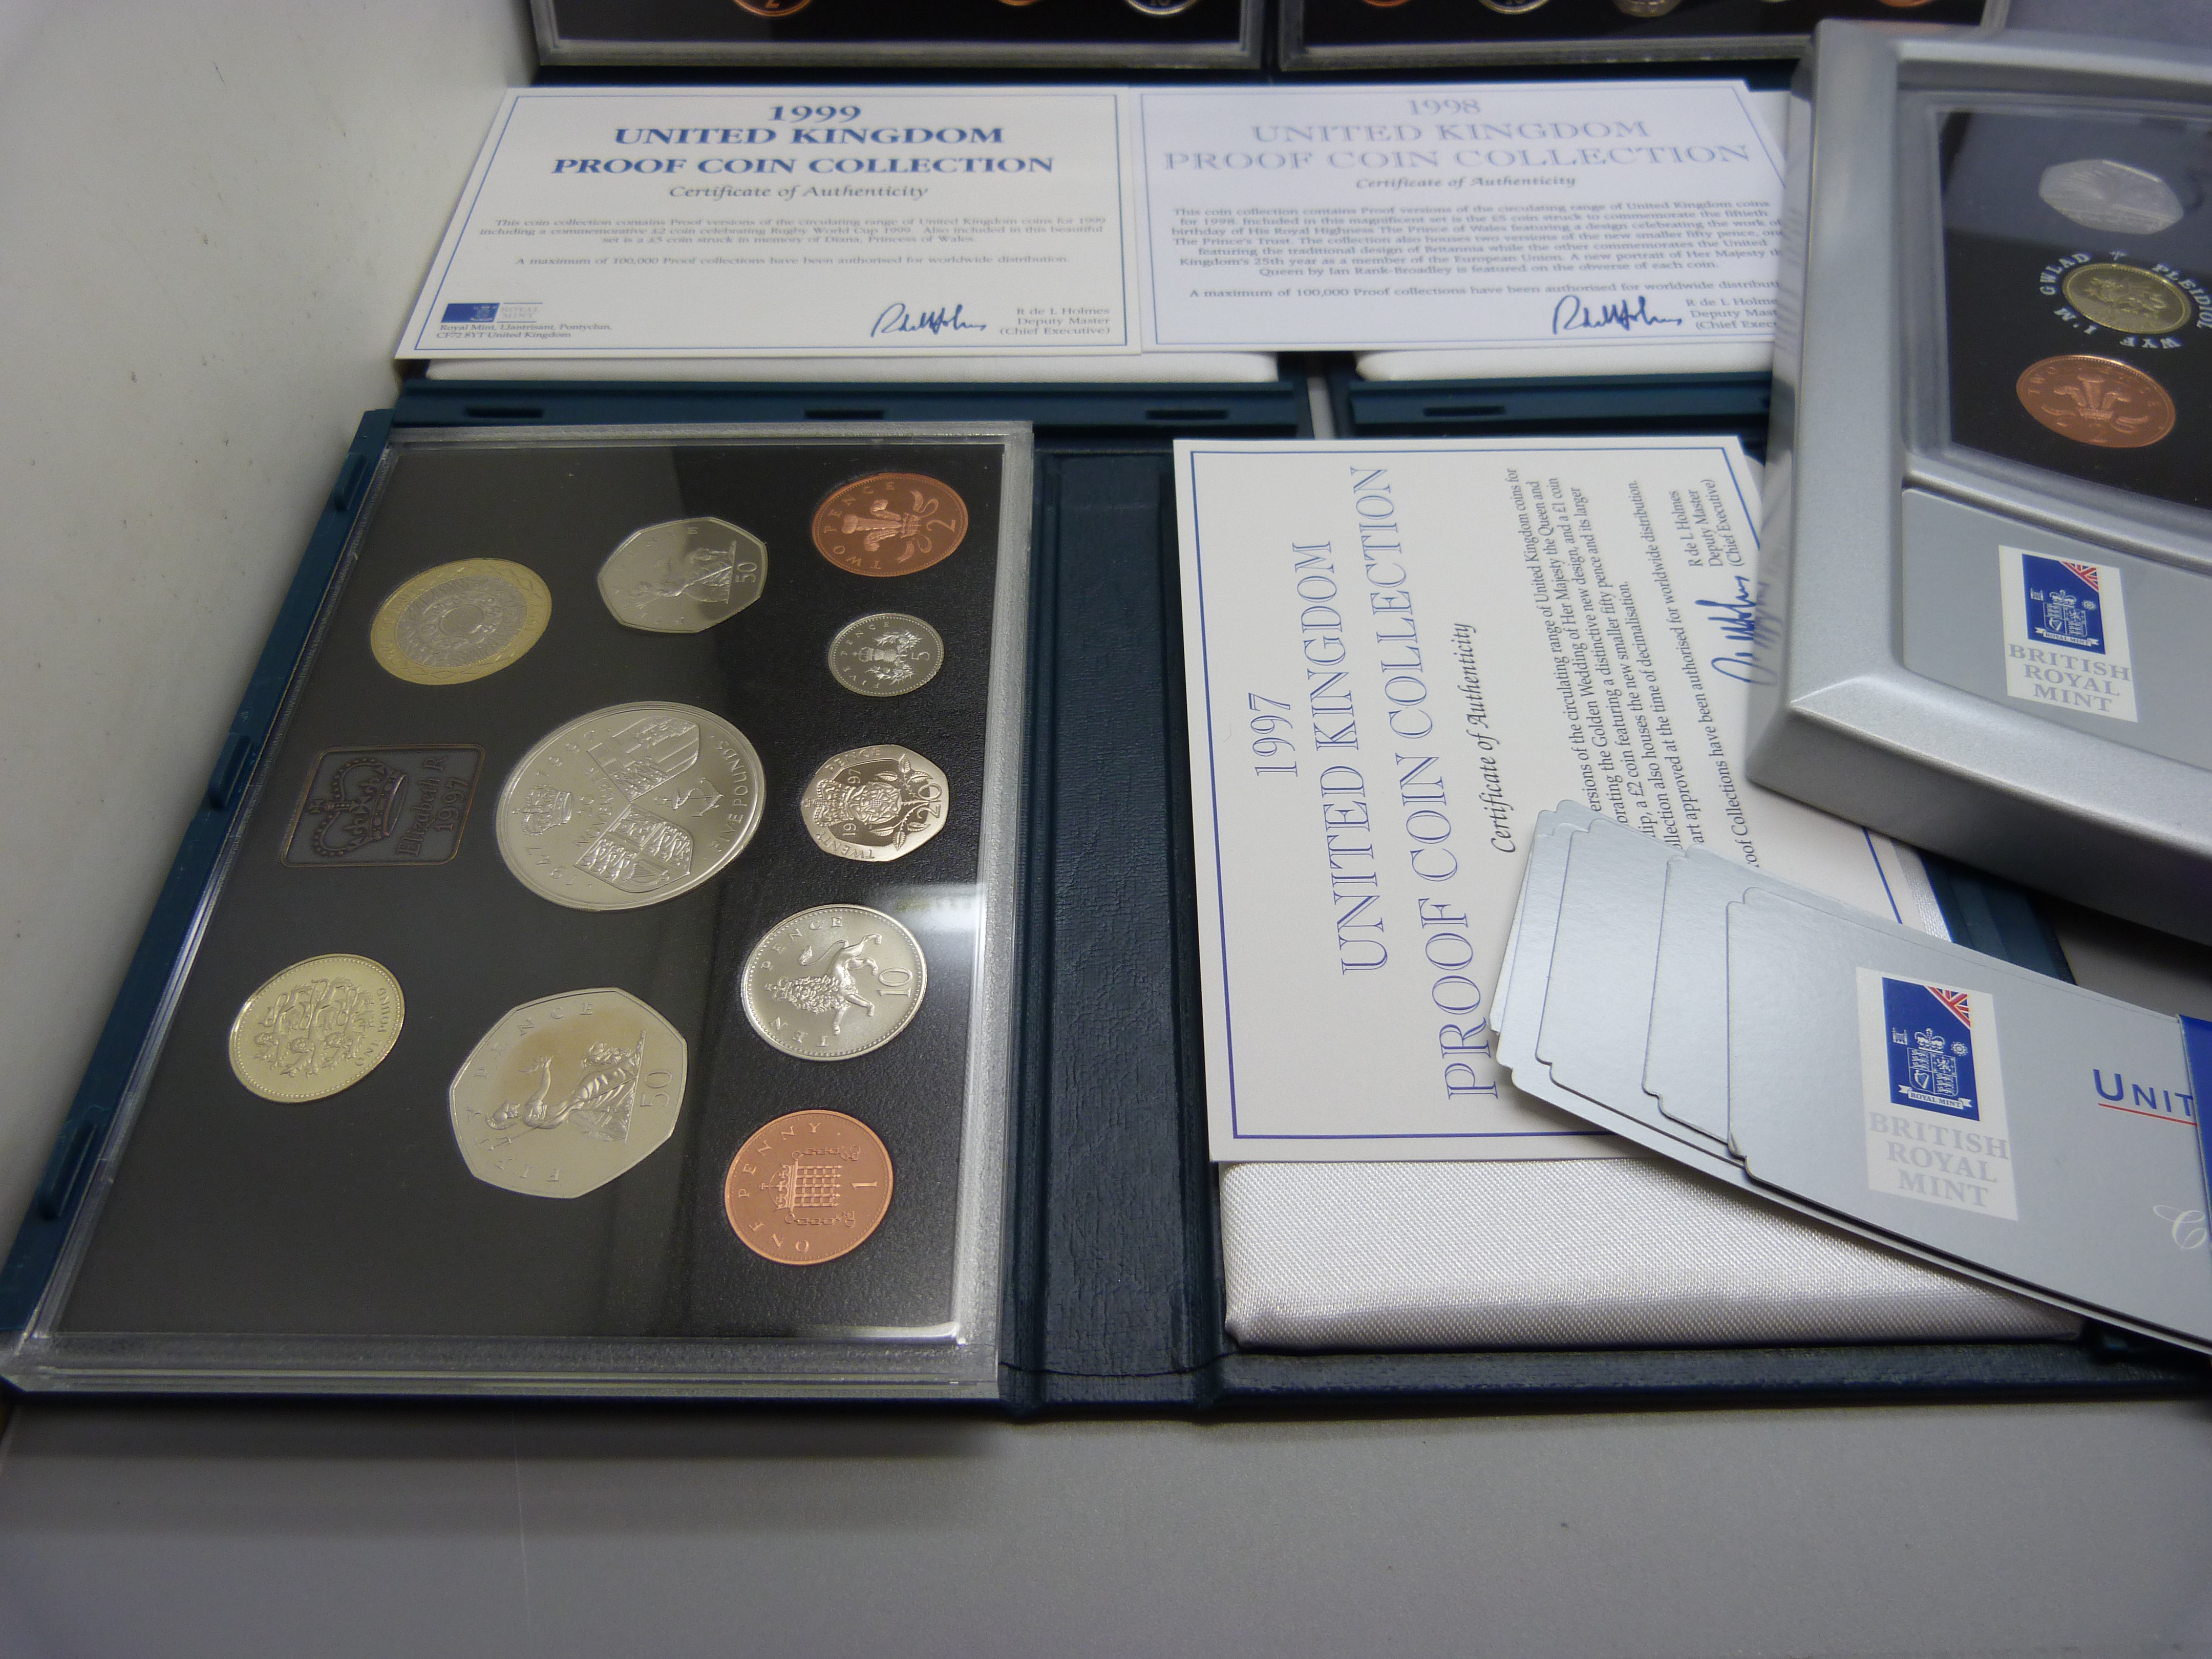 Four UK proof coin sets, 1997, 1998, 1999 and 2000 - Image 3 of 4